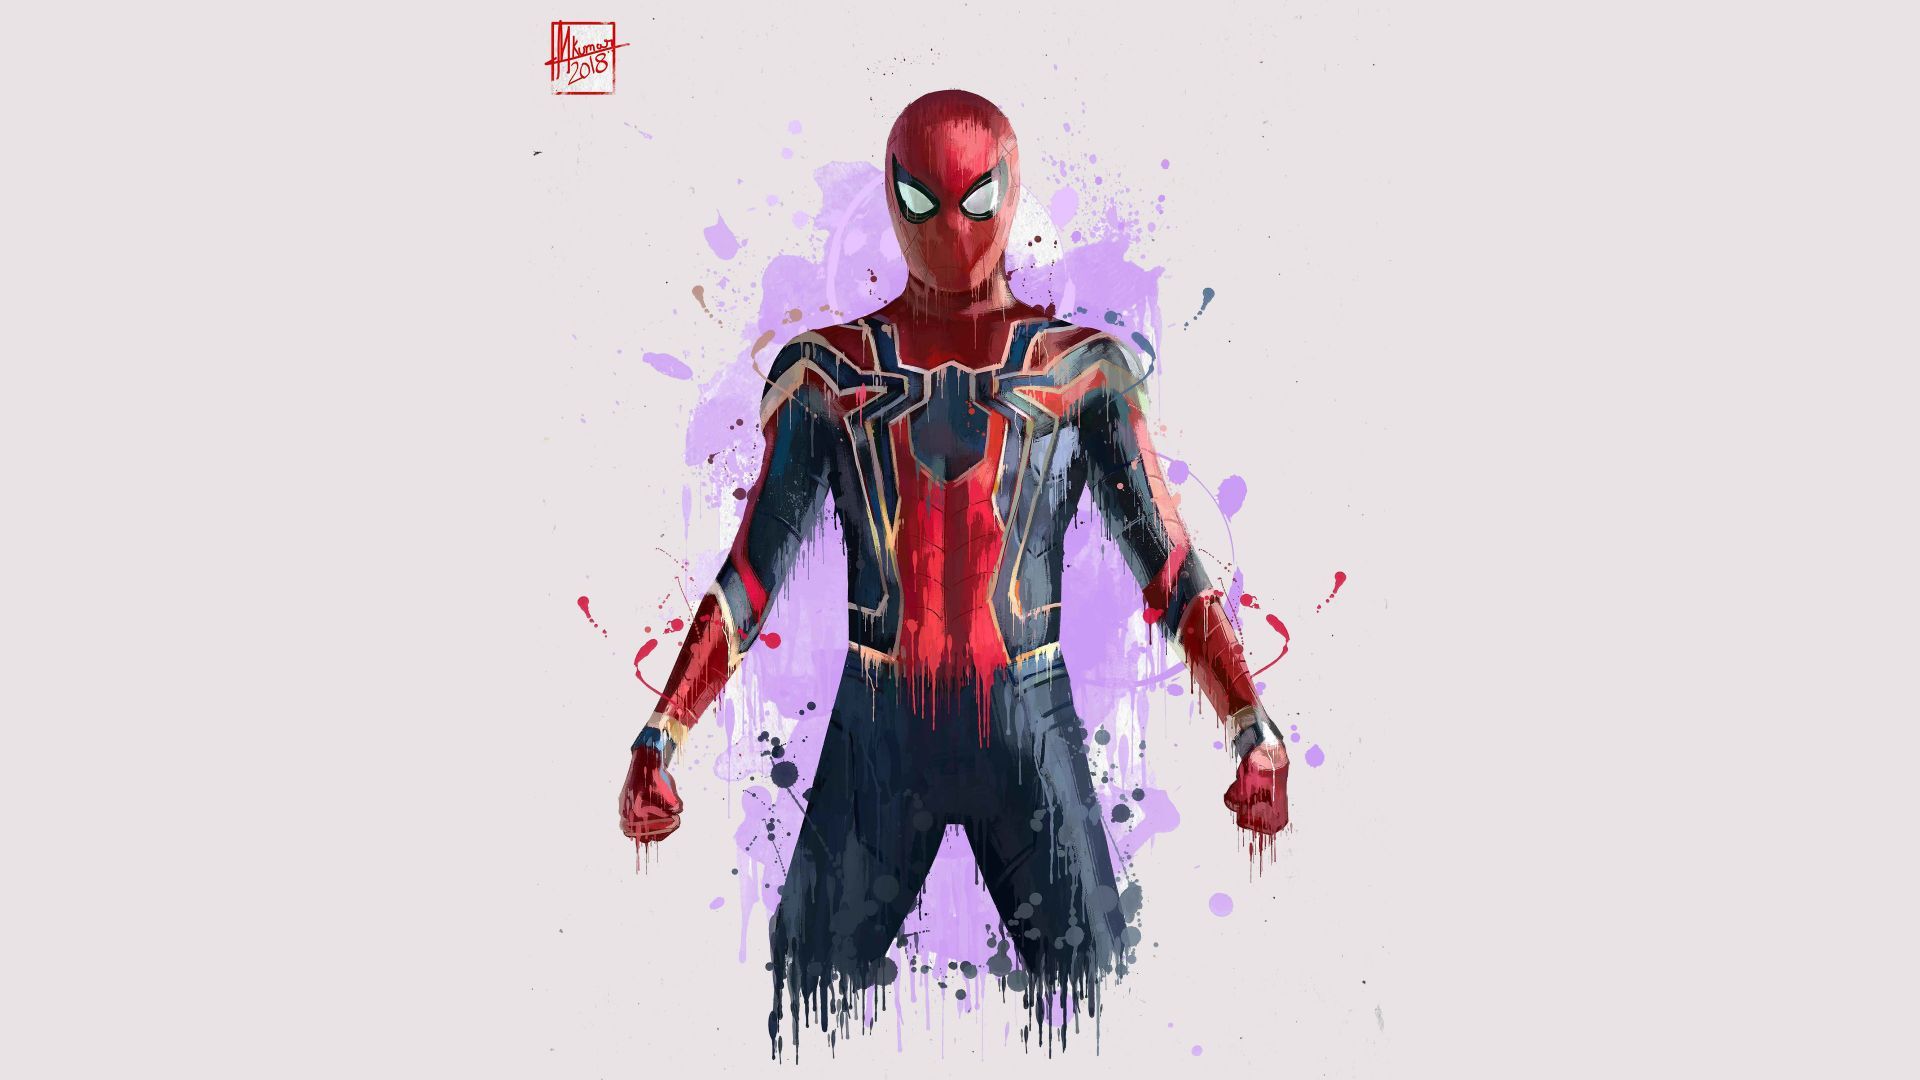 Download wallpapers of iron spider spider